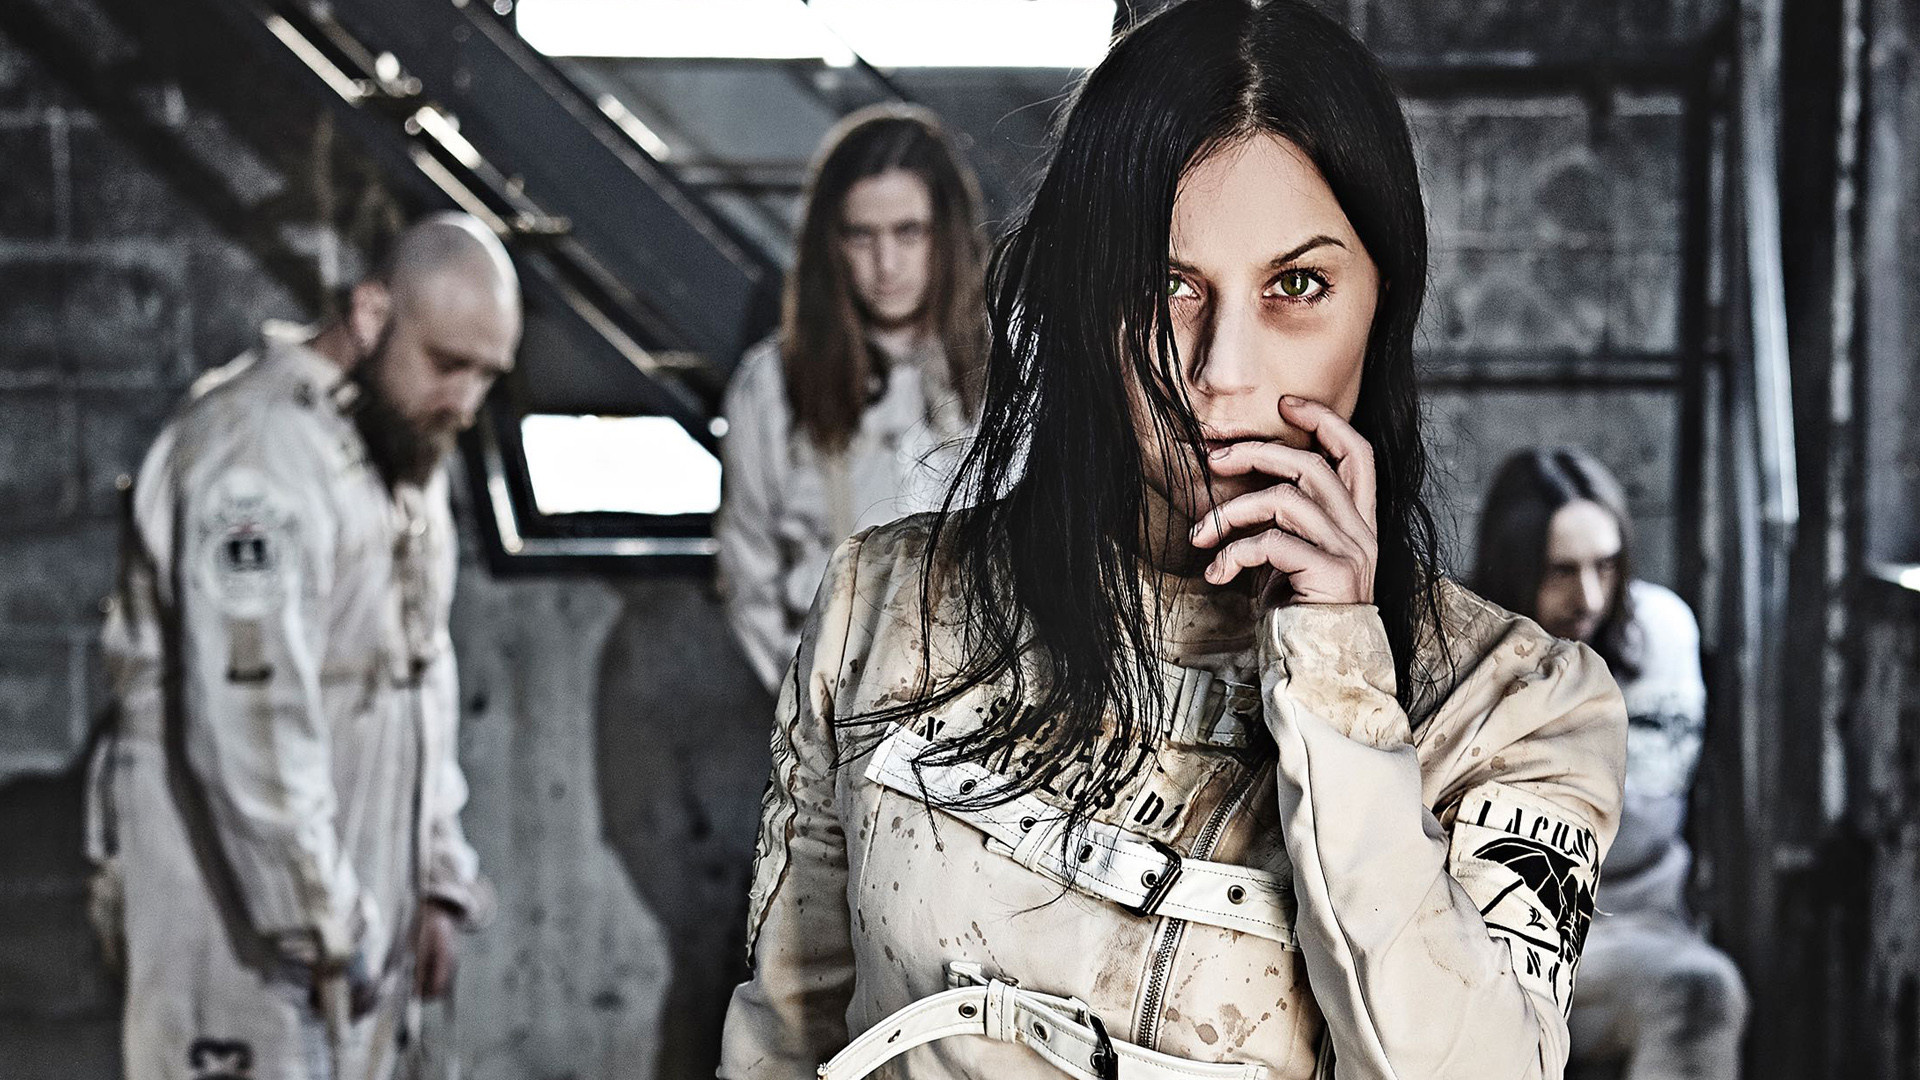 66 pictures, Lacuna Coil wallpapers, 1920x1080 Full HD Desktop